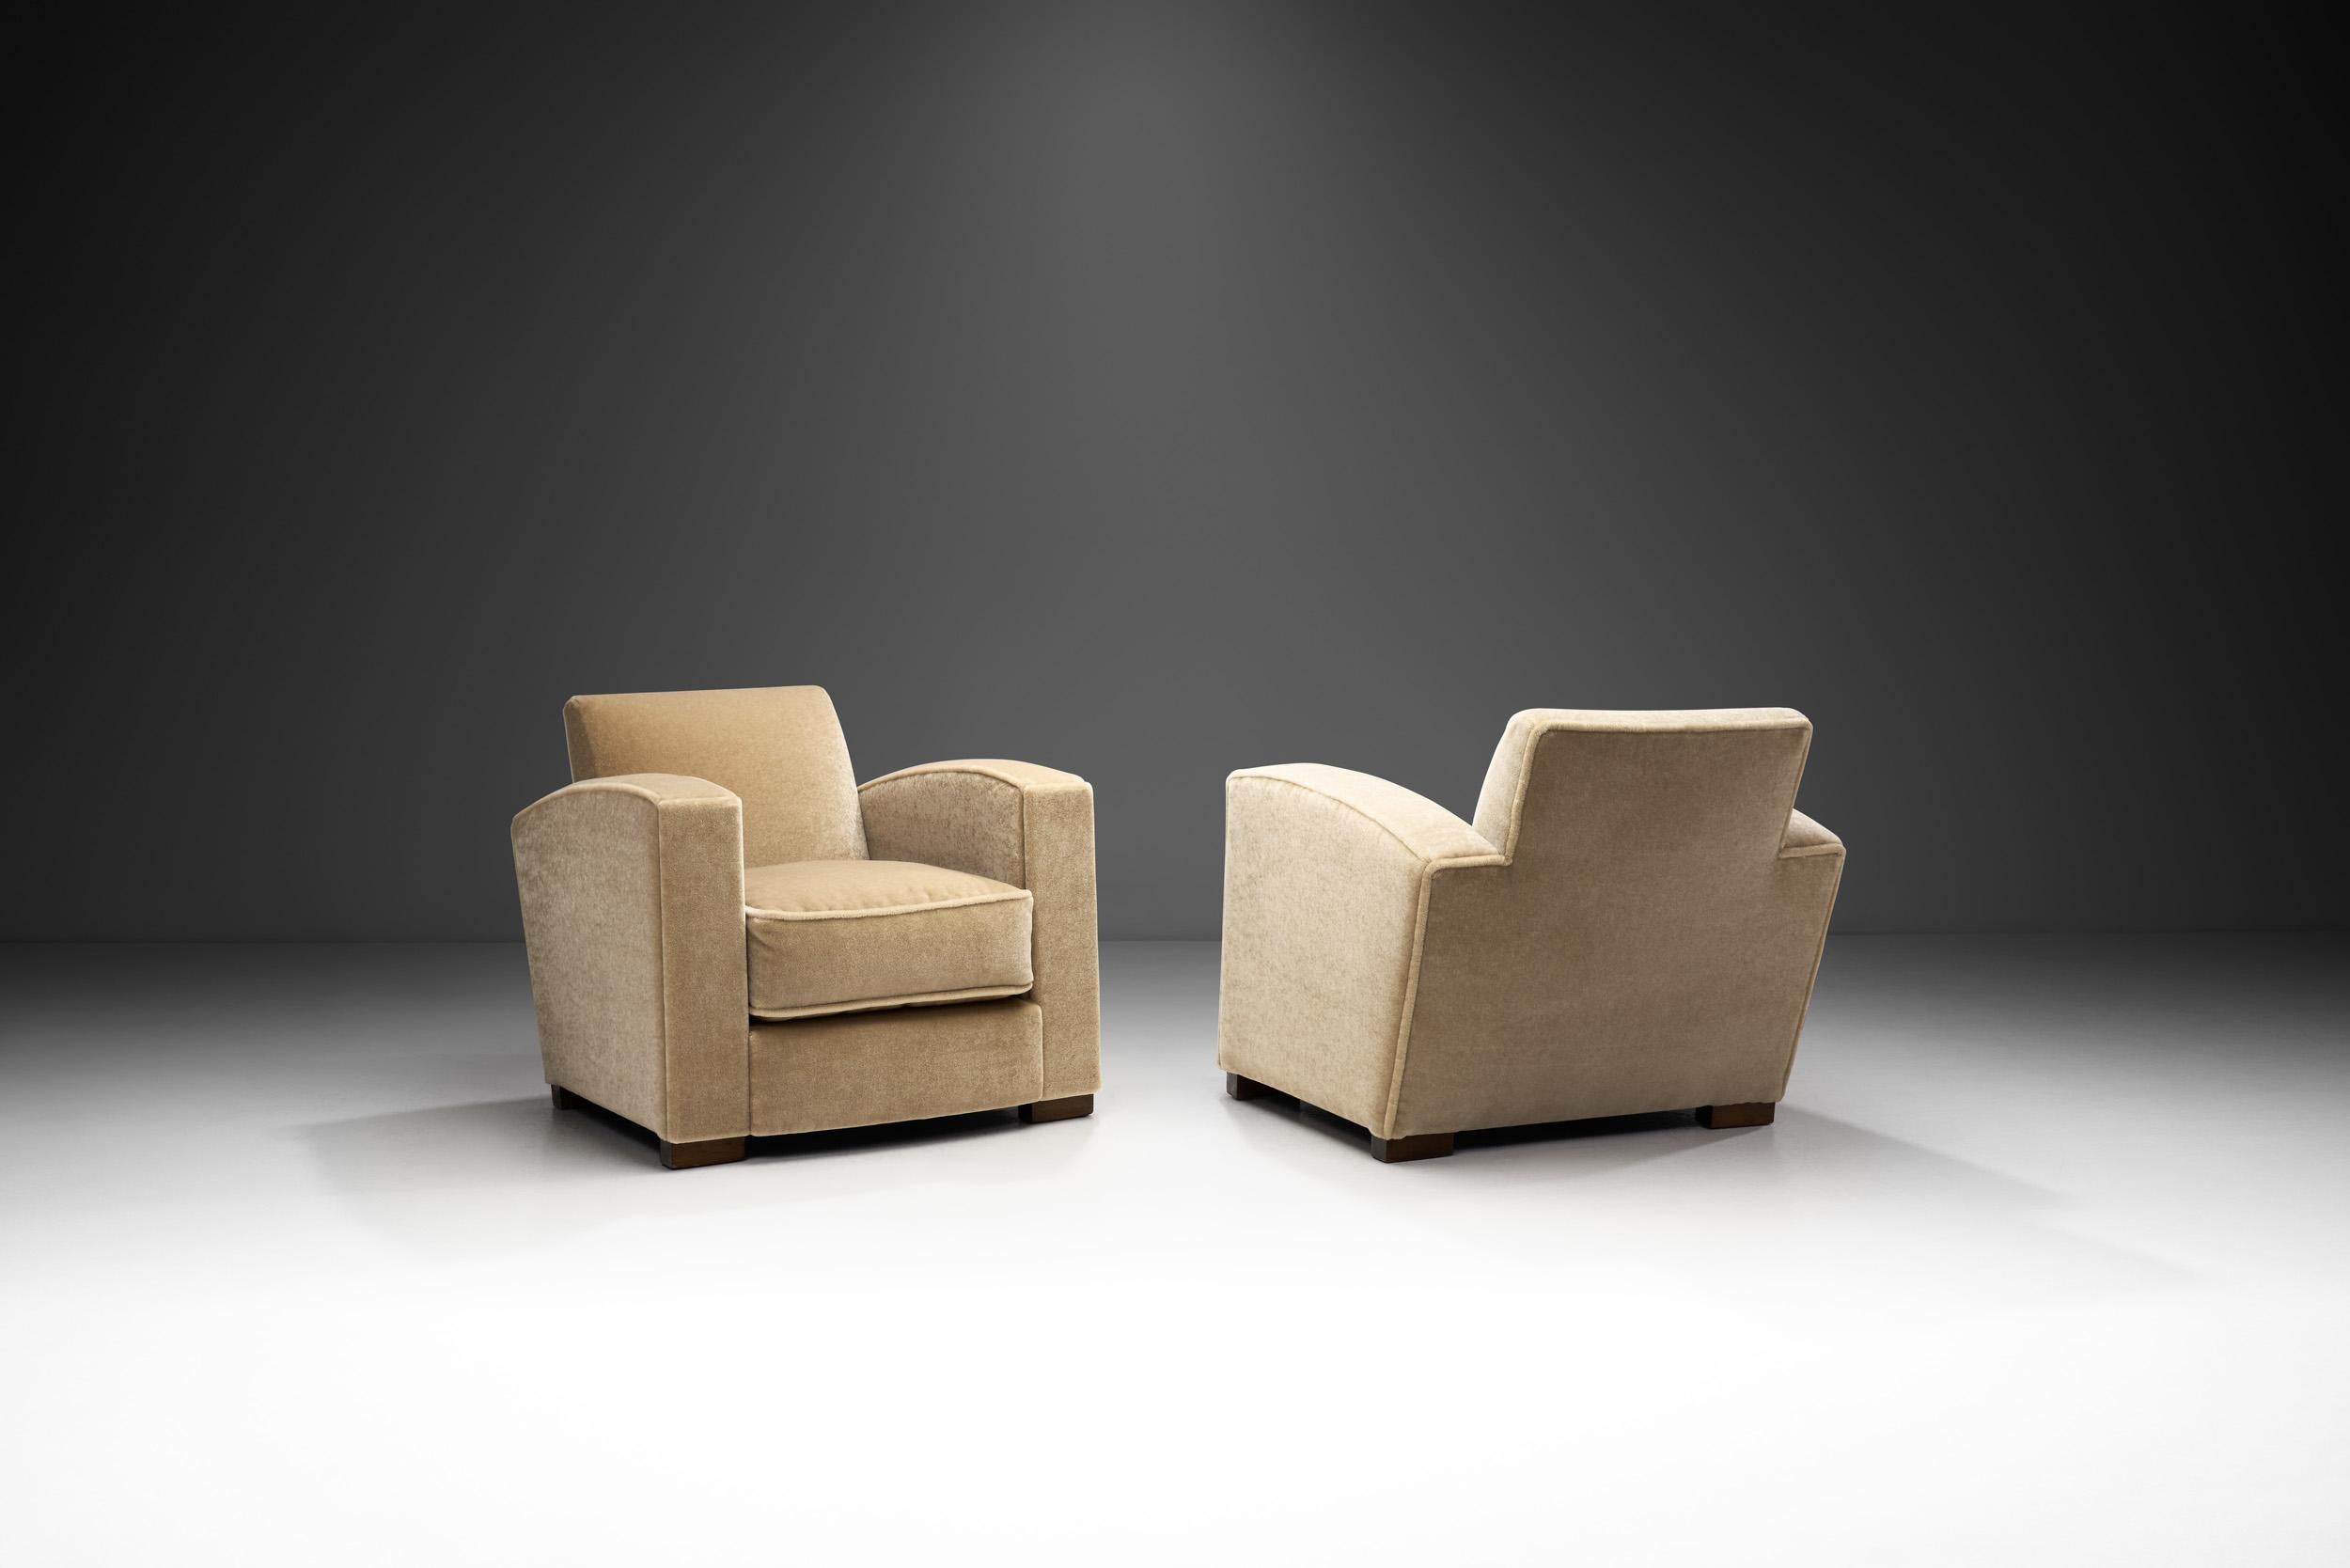 This elegant pair of club chairs is an interesting bridge between the 20th century’s earlier artistic movements, like Art Deco, and the modernist movement that was about to shape much of Europe’s, and therefore France’s furniture design for the